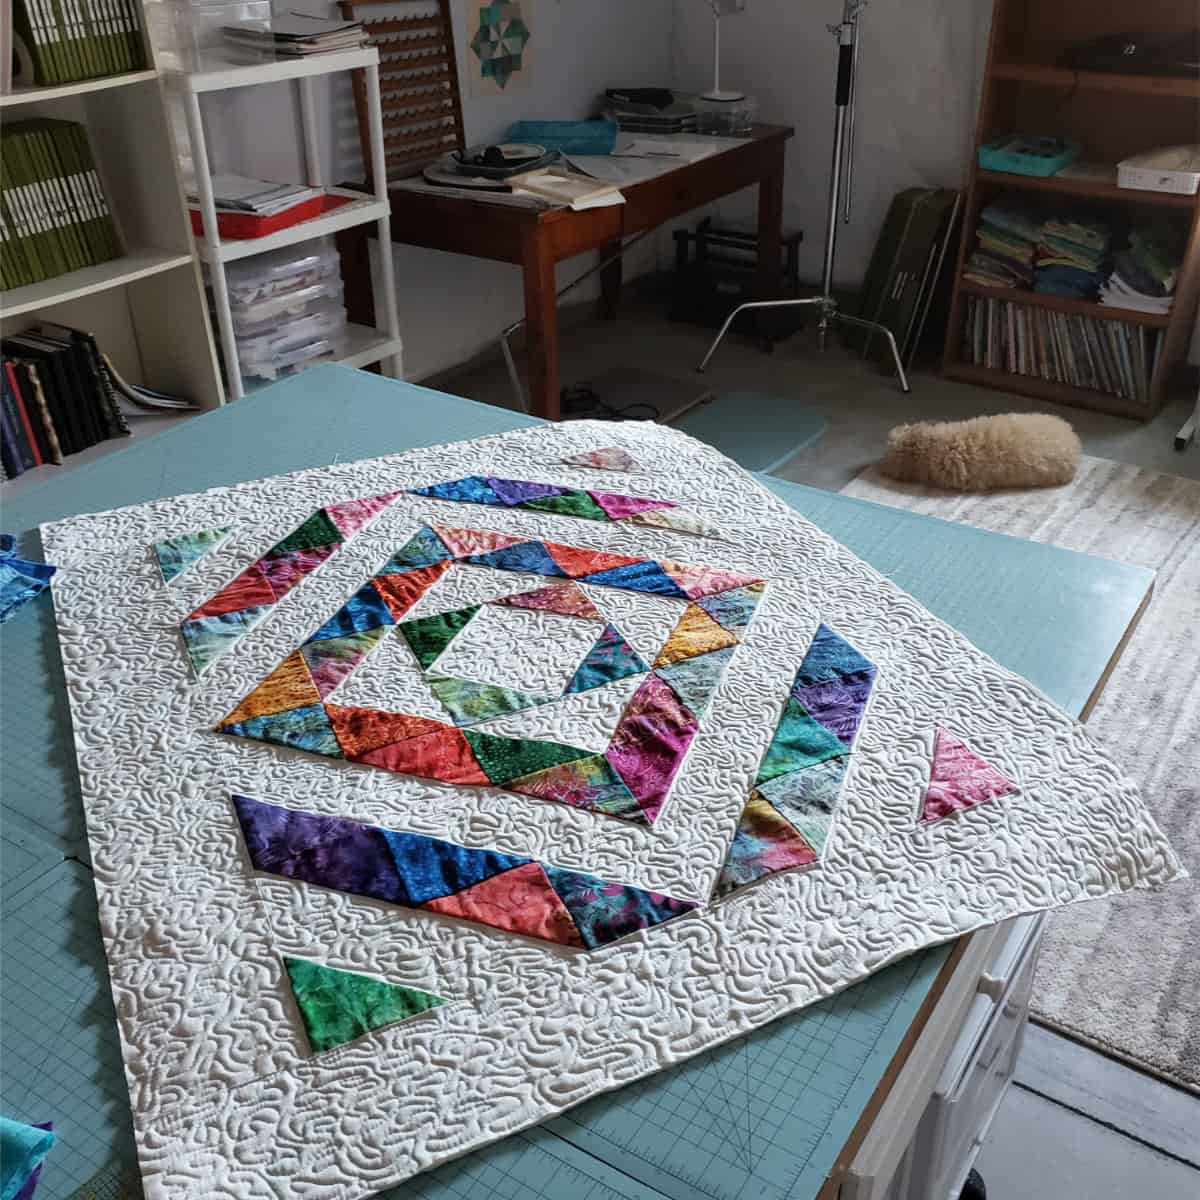 Once the quilting is done, trim the quilt